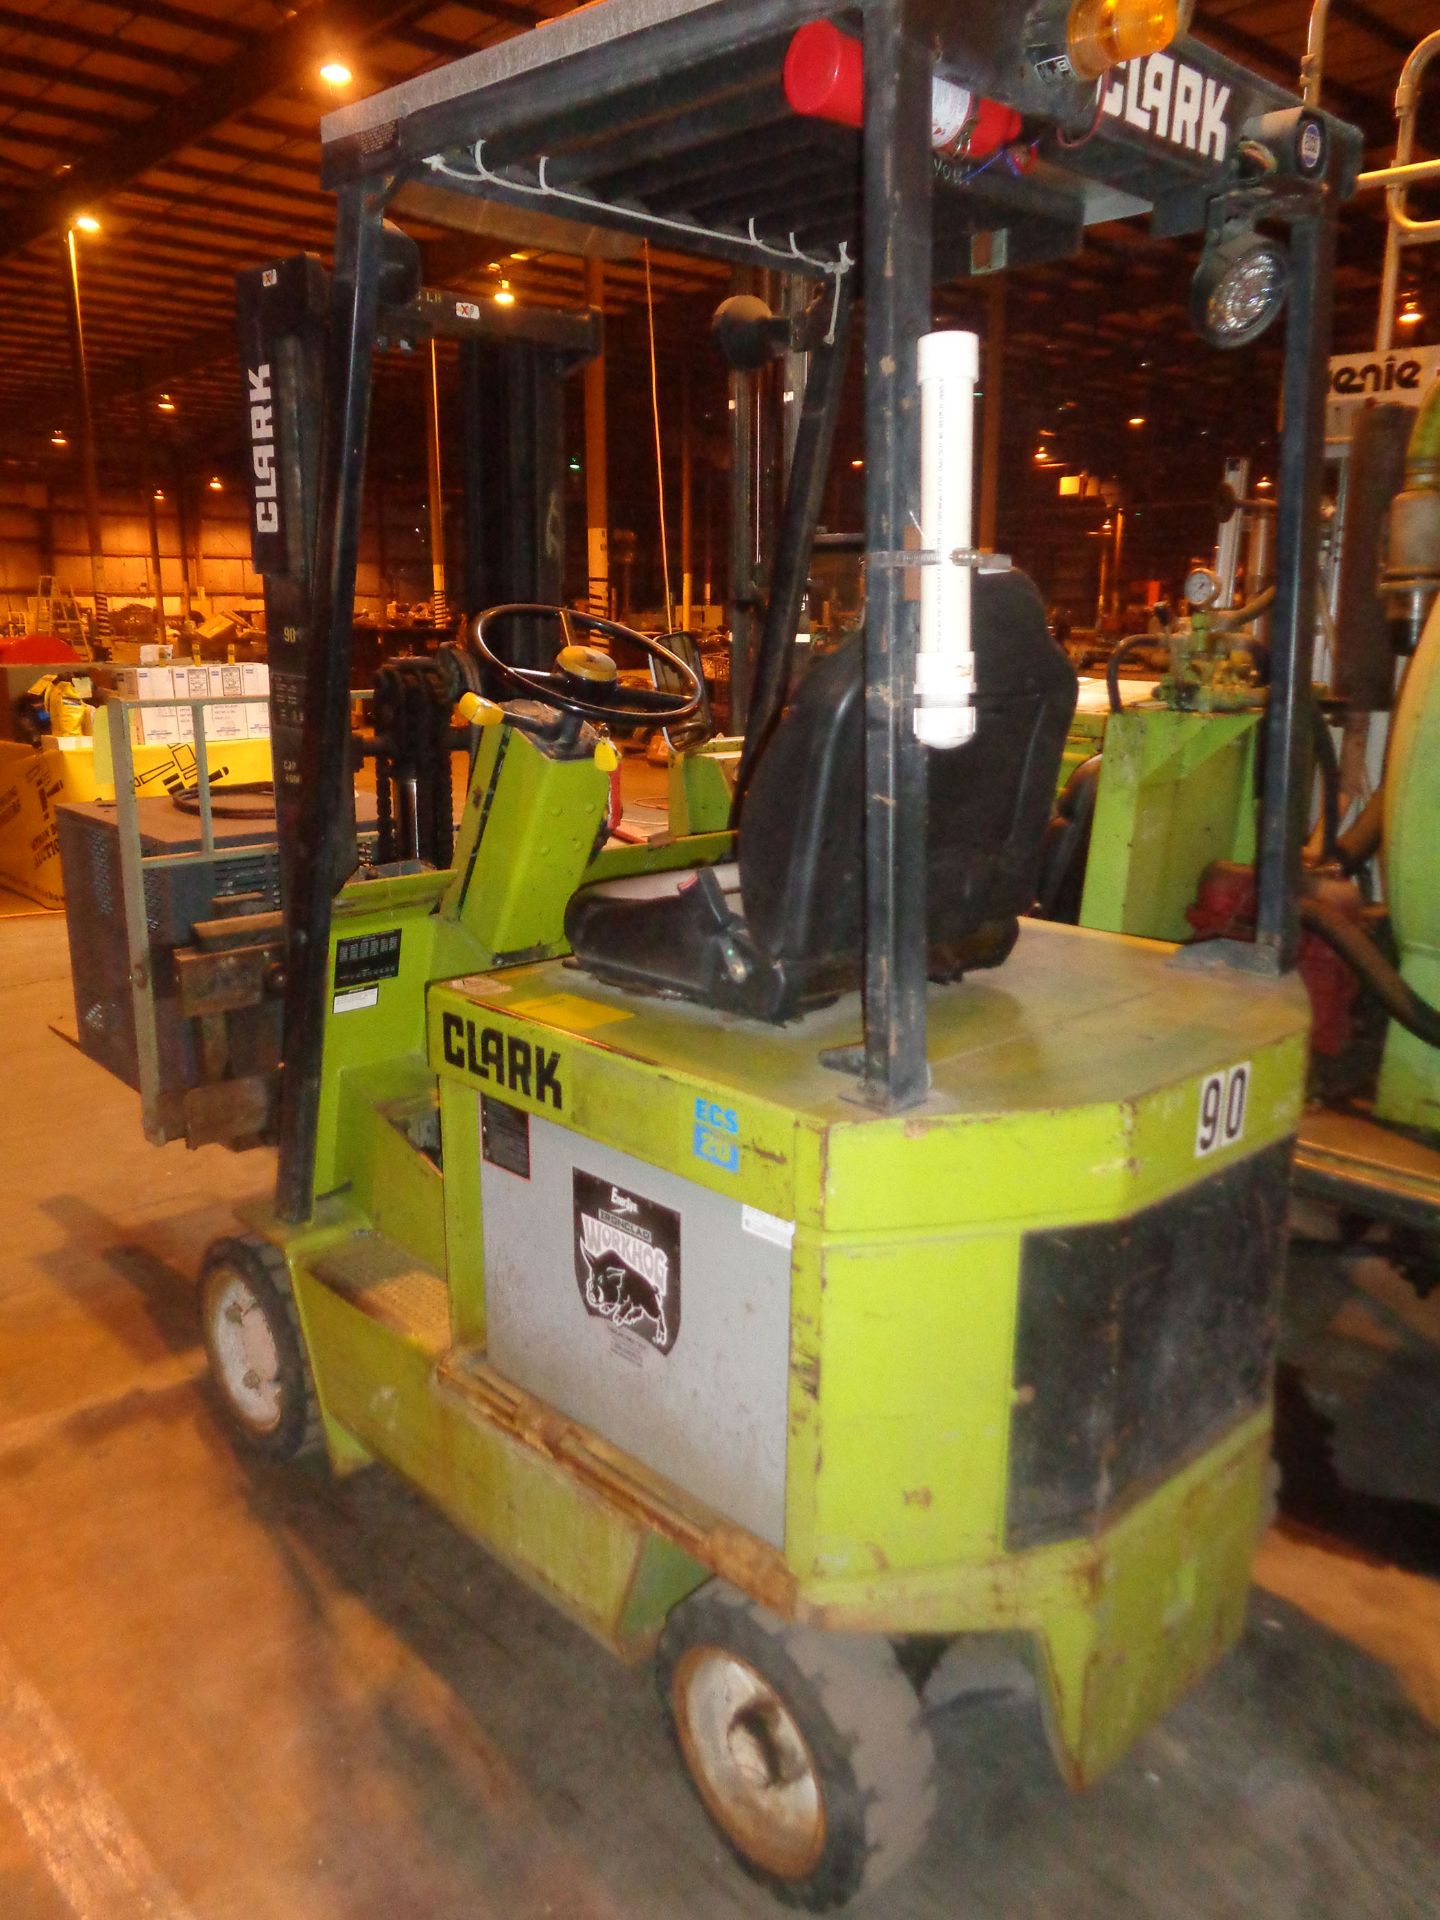 CLARK ECS 20 TYPE E 4000-LB ELECTRIC FORKLIFT W/ SIDE SHIFT & BATTERY CHARGER - Image 3 of 4